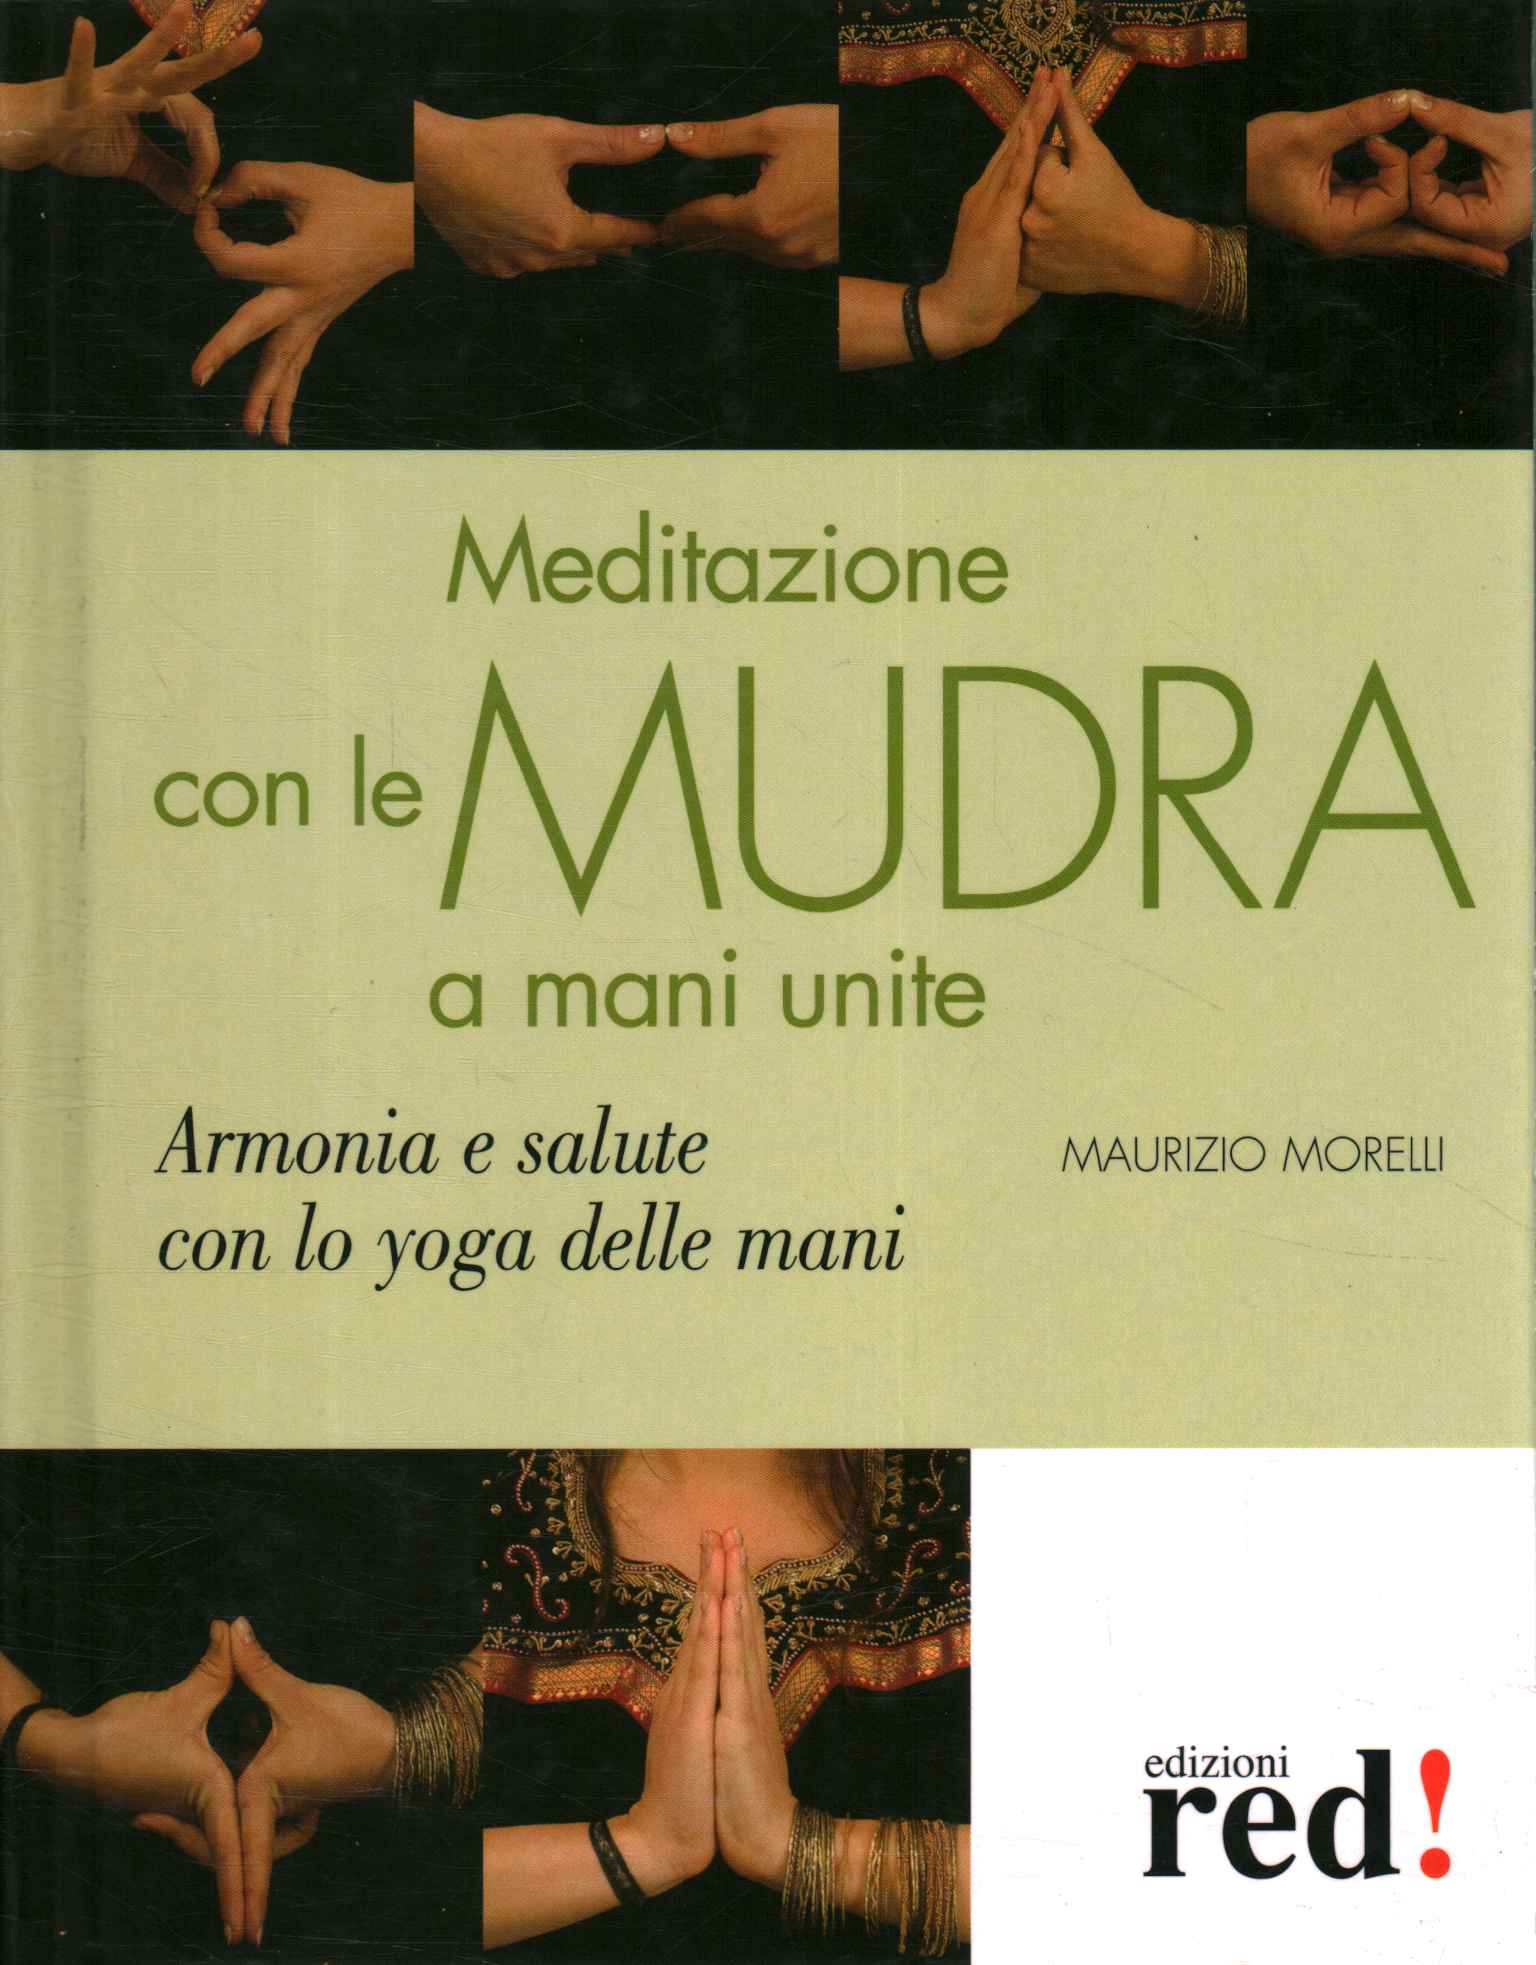 Meditation with joined hands Mudras